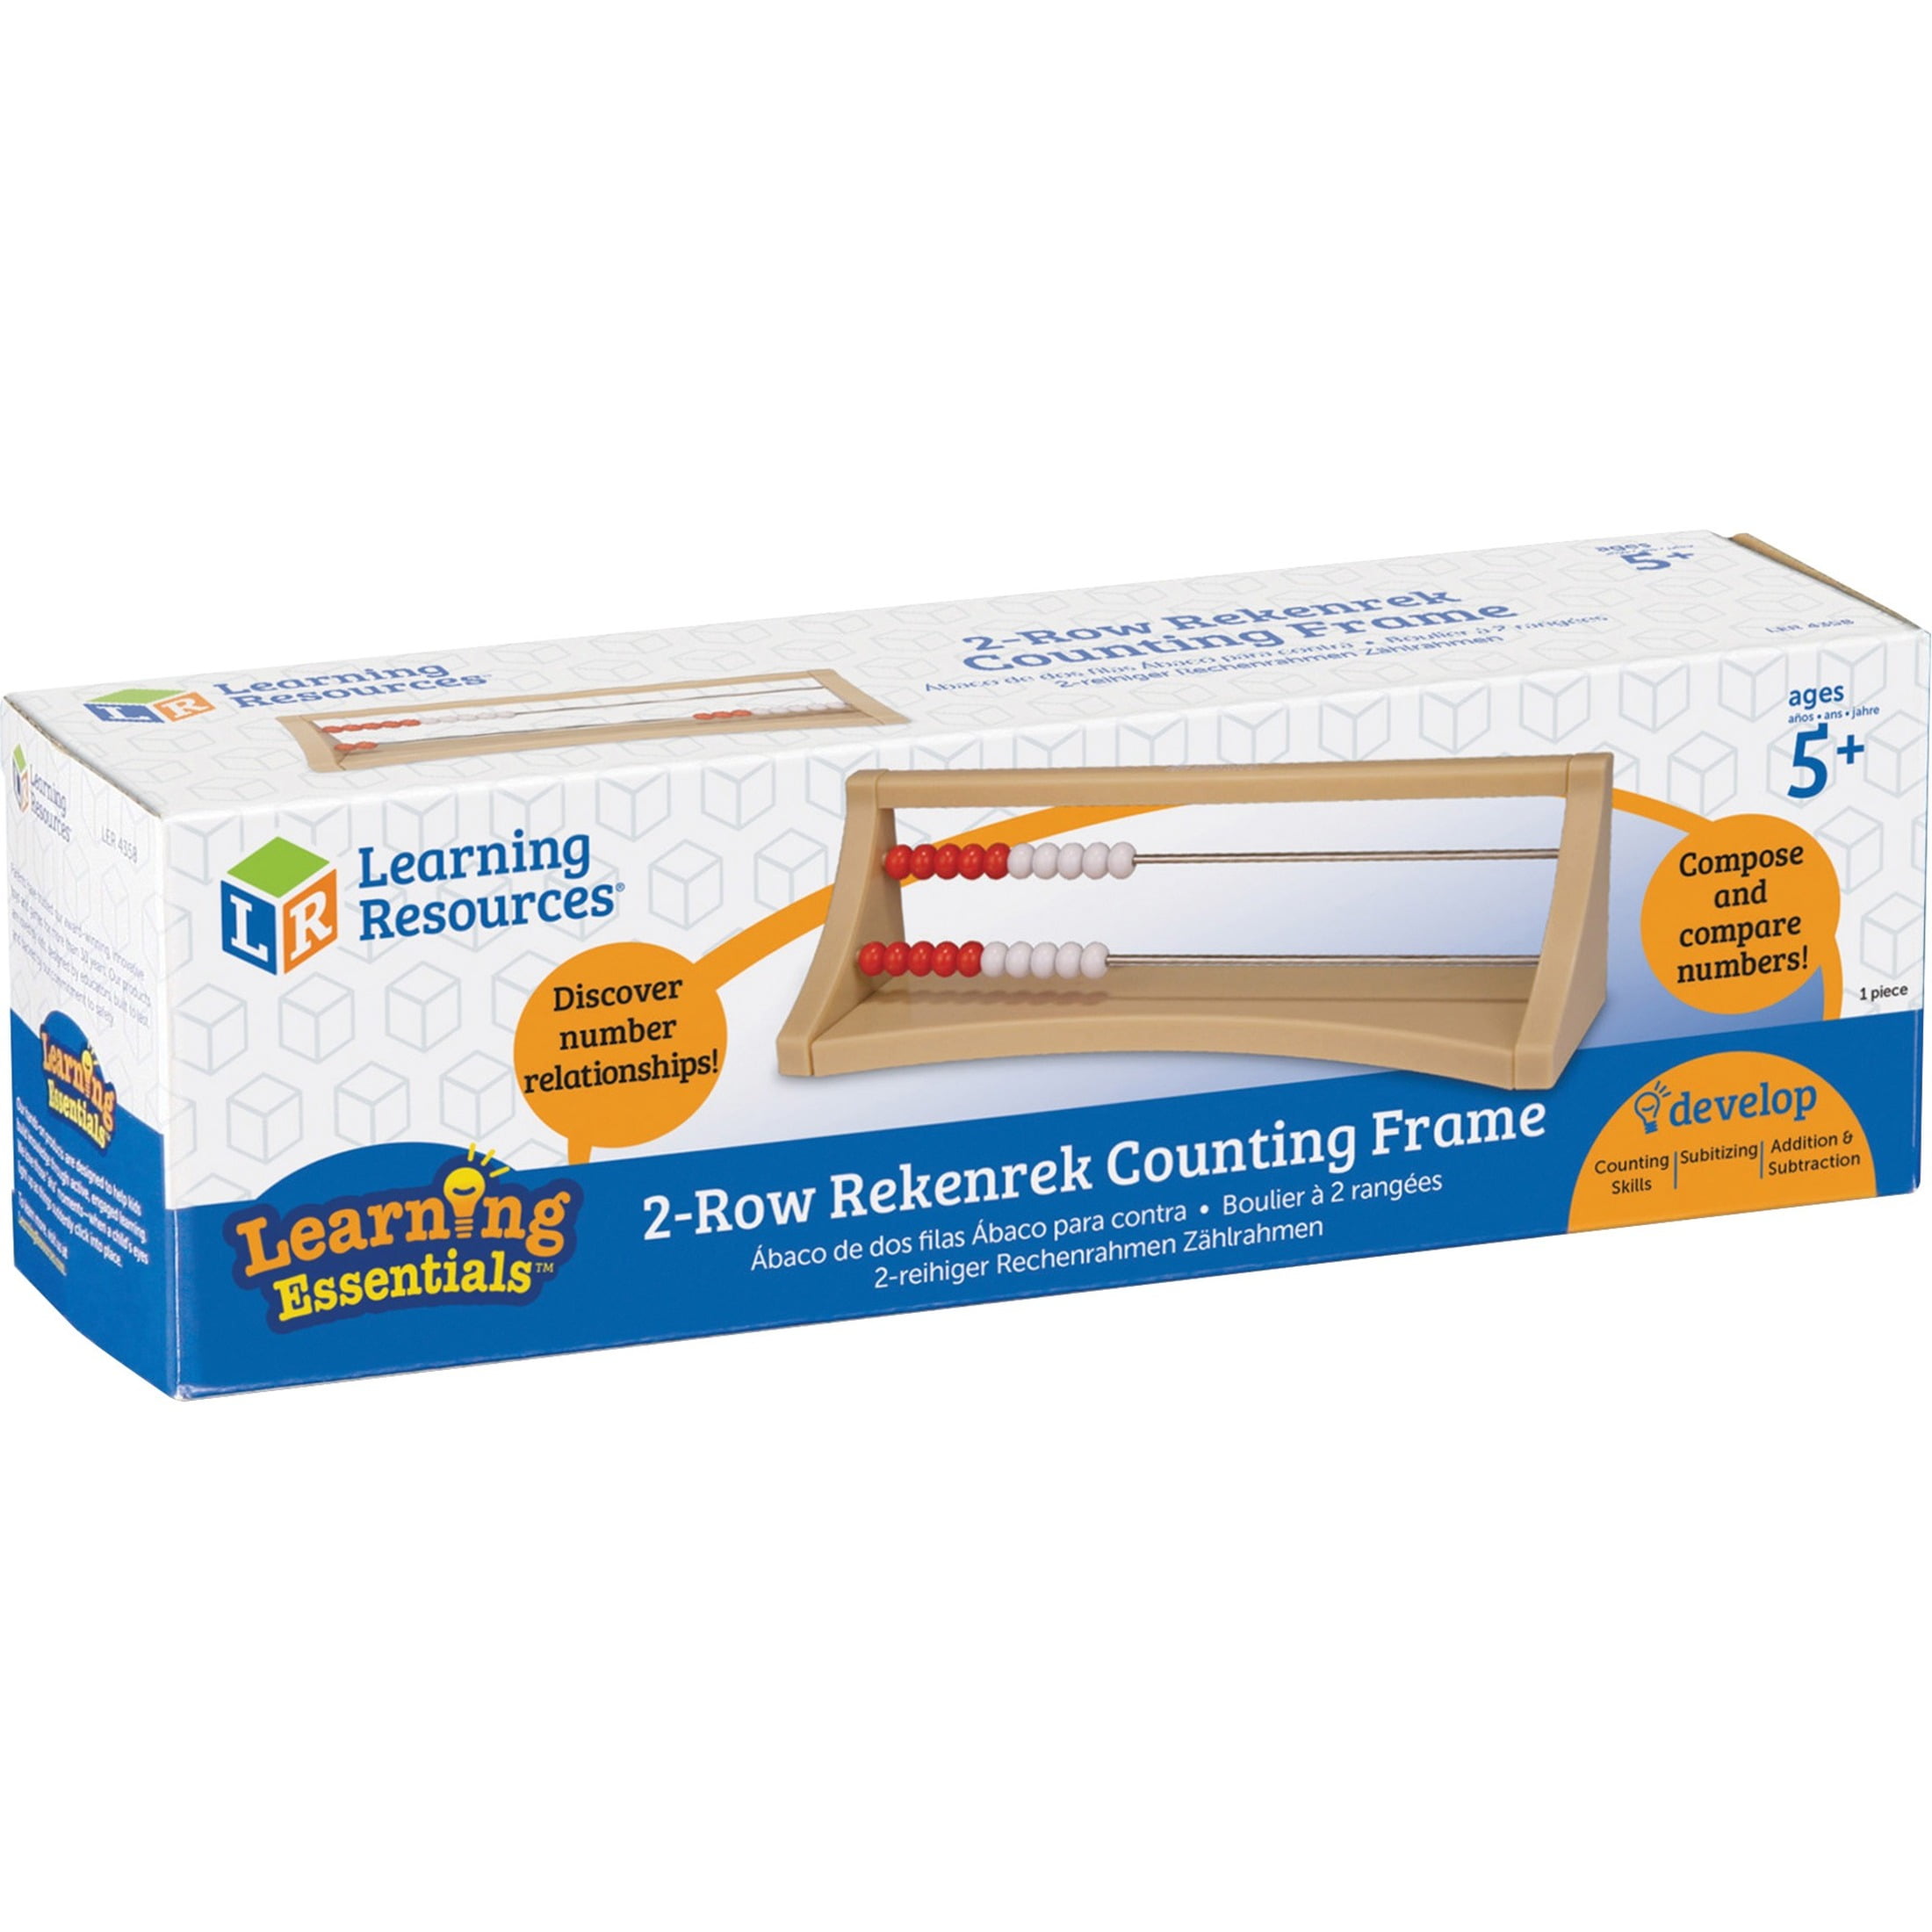 REKENREK COUNTING FRAMES X 2/ QUALITY WOODEN CONTRUCTION/ BRAND NEW 